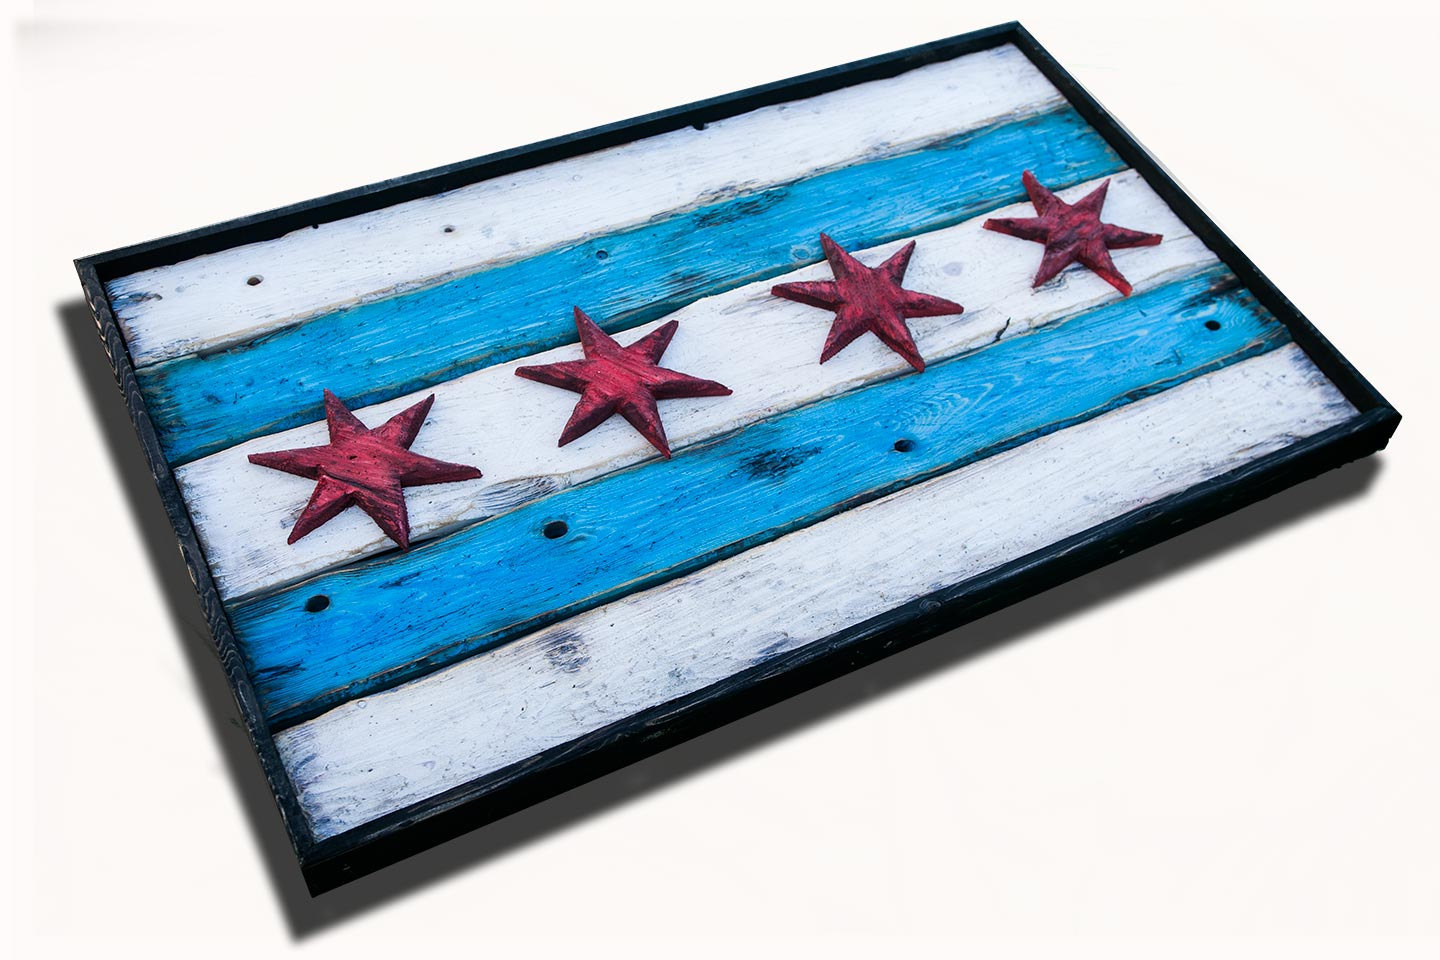 recycled Chicago flag art art weathered Distressed Wooden Chicago Flag vintage distressed Handmade home decor recycled Wall art